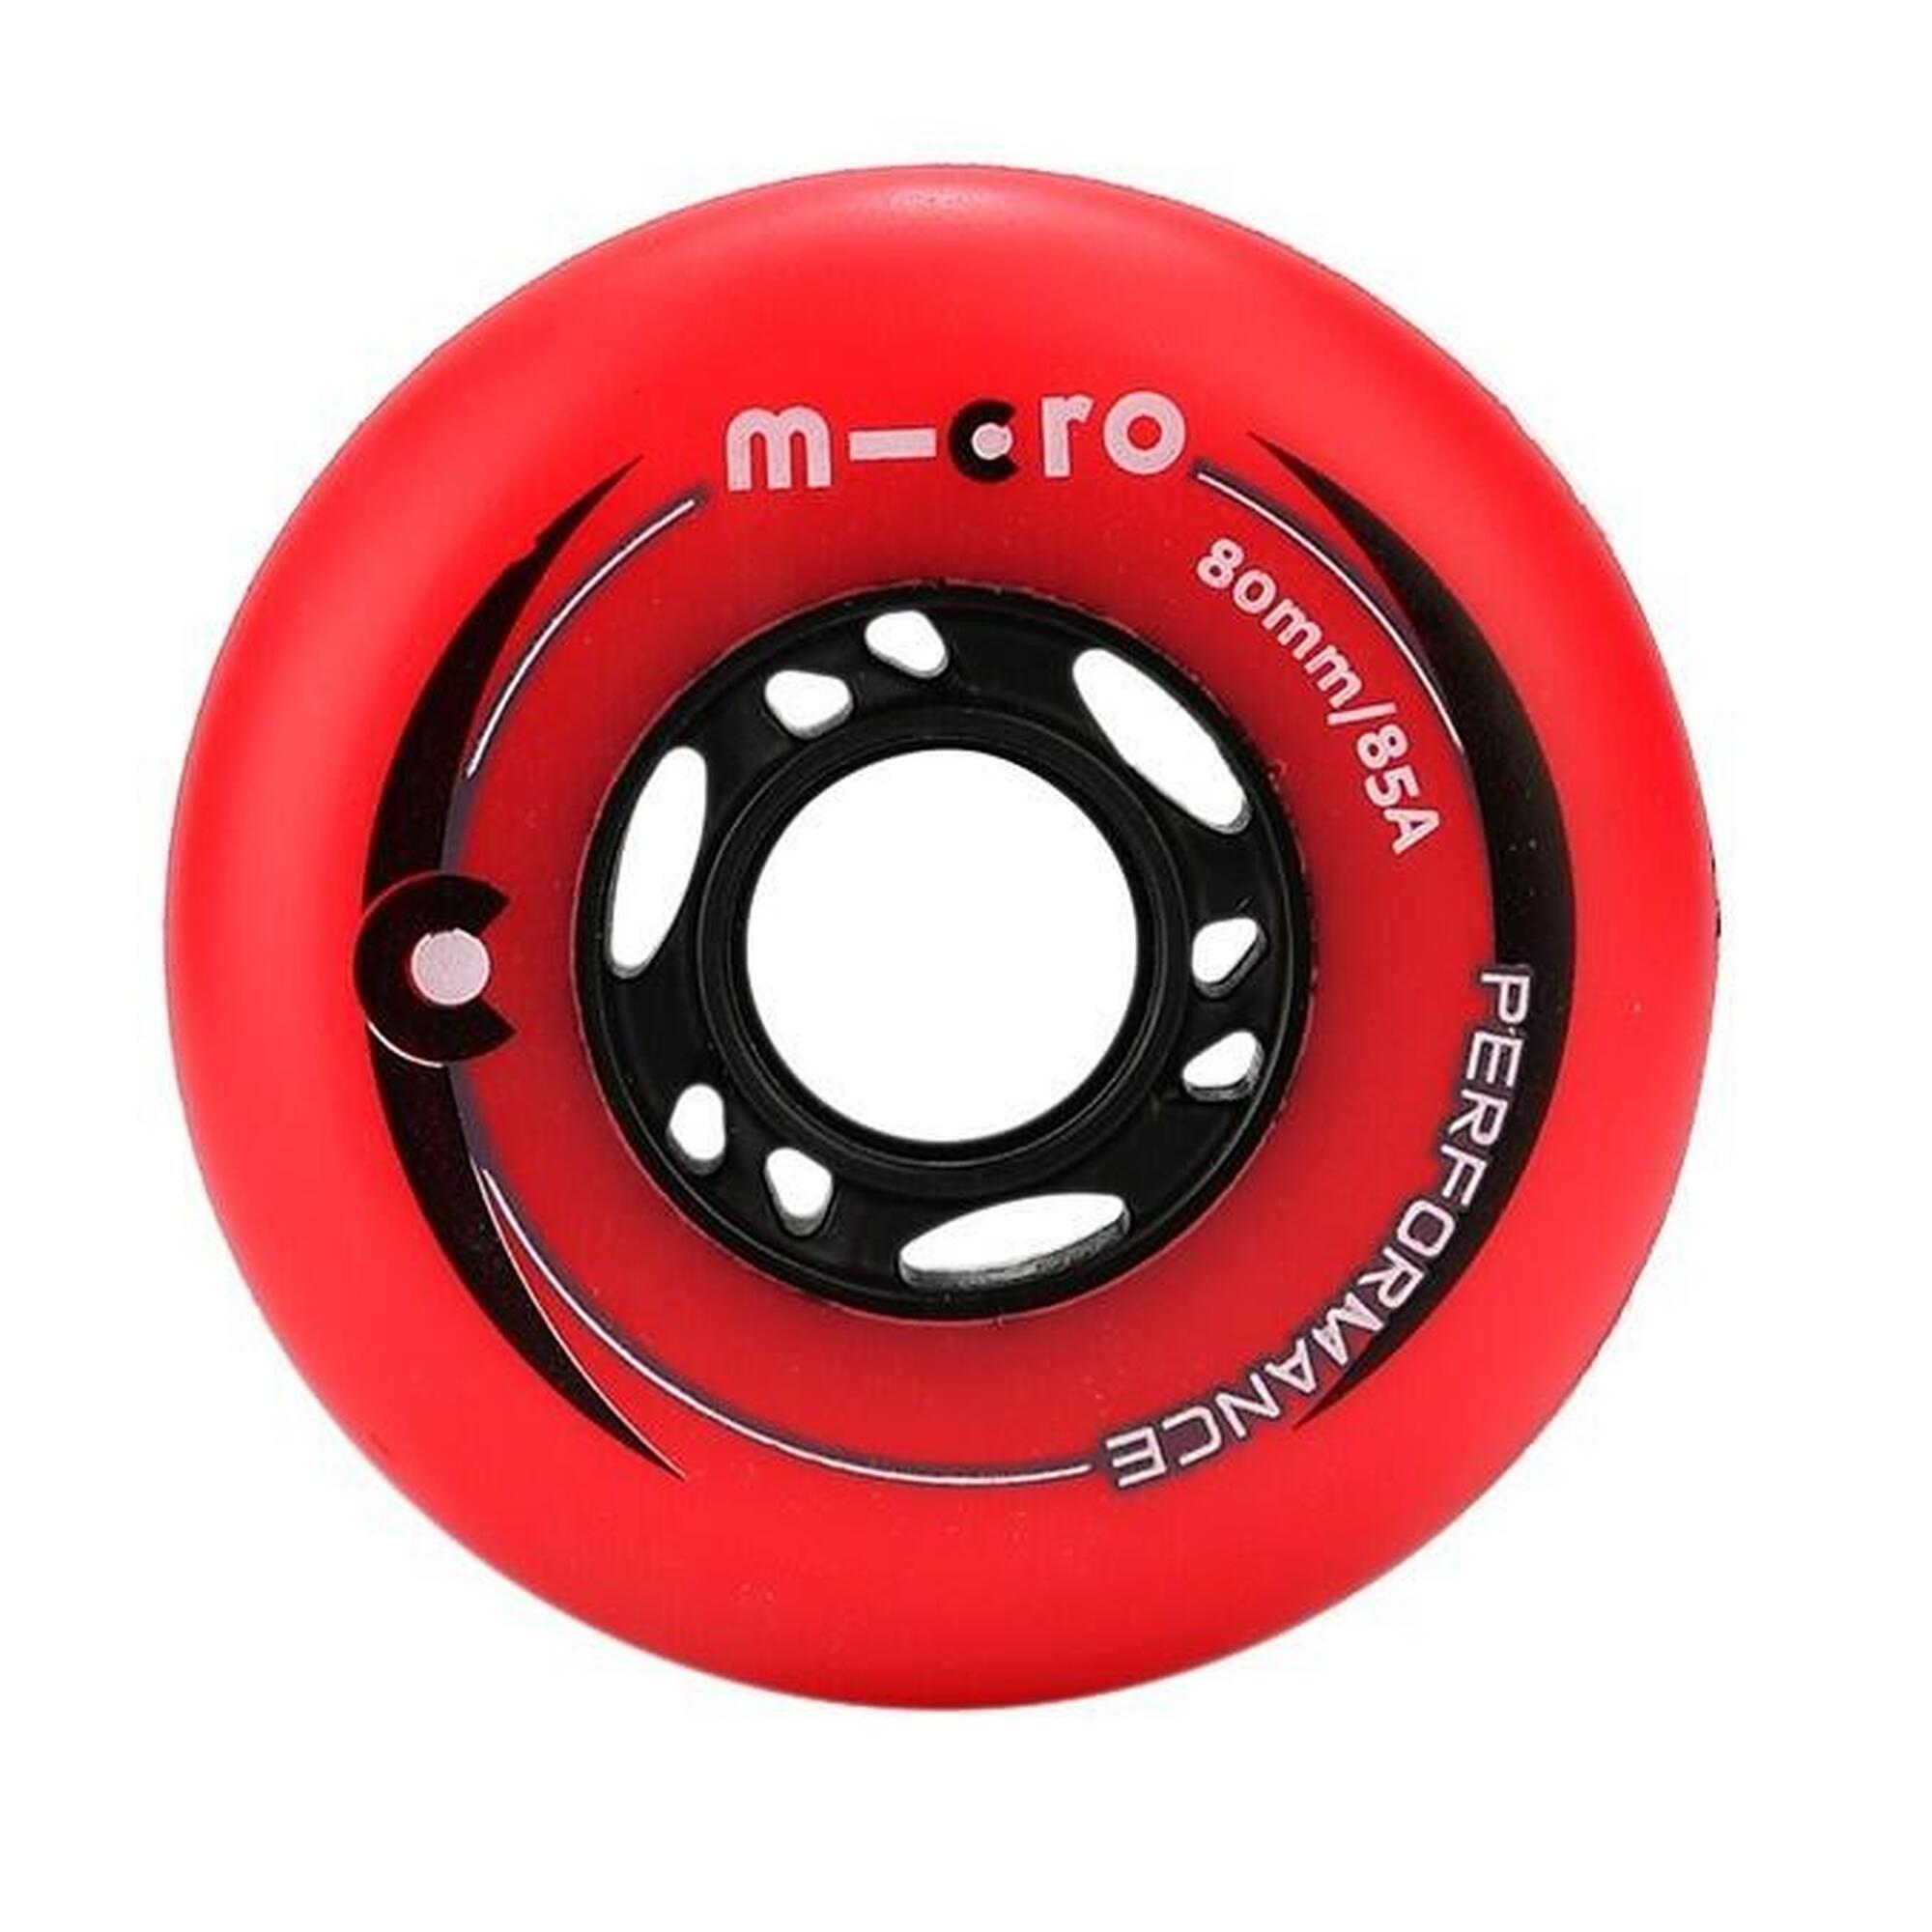 MICRO SKATE PERFORMANCE WHEELS - 80MM/85A RED 4 PACK 80 MM